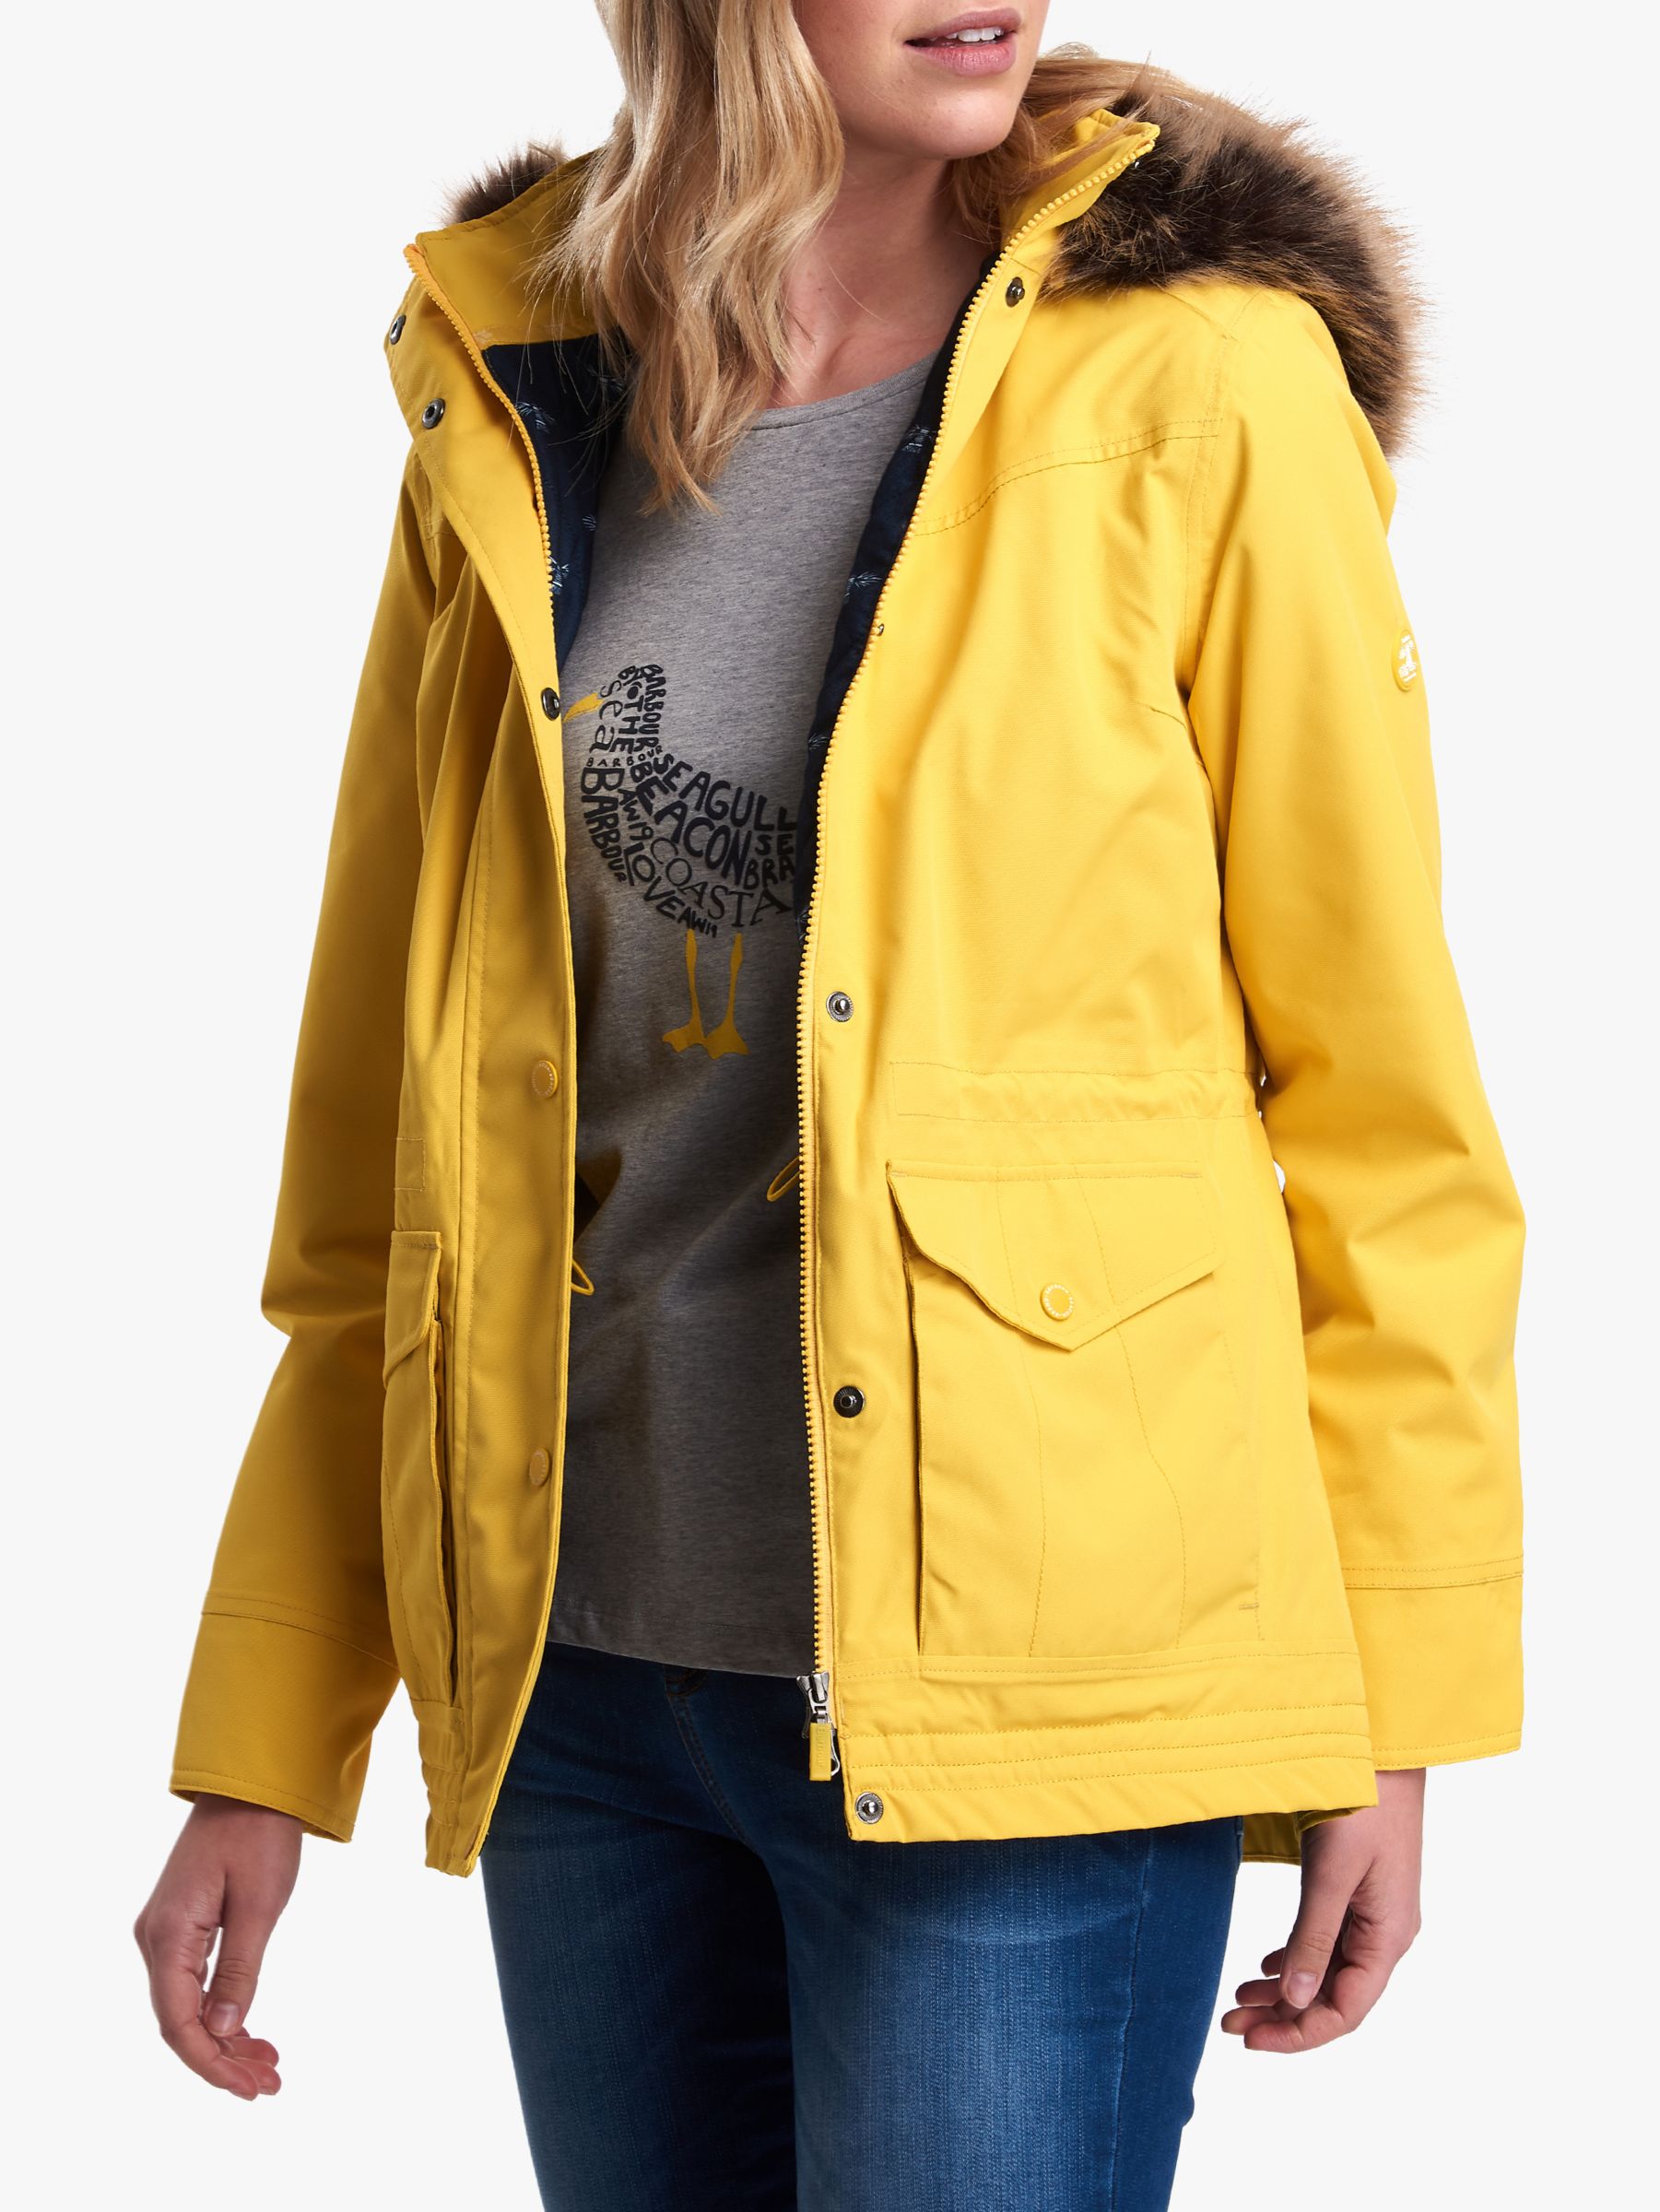 barbour yellow jacket womens